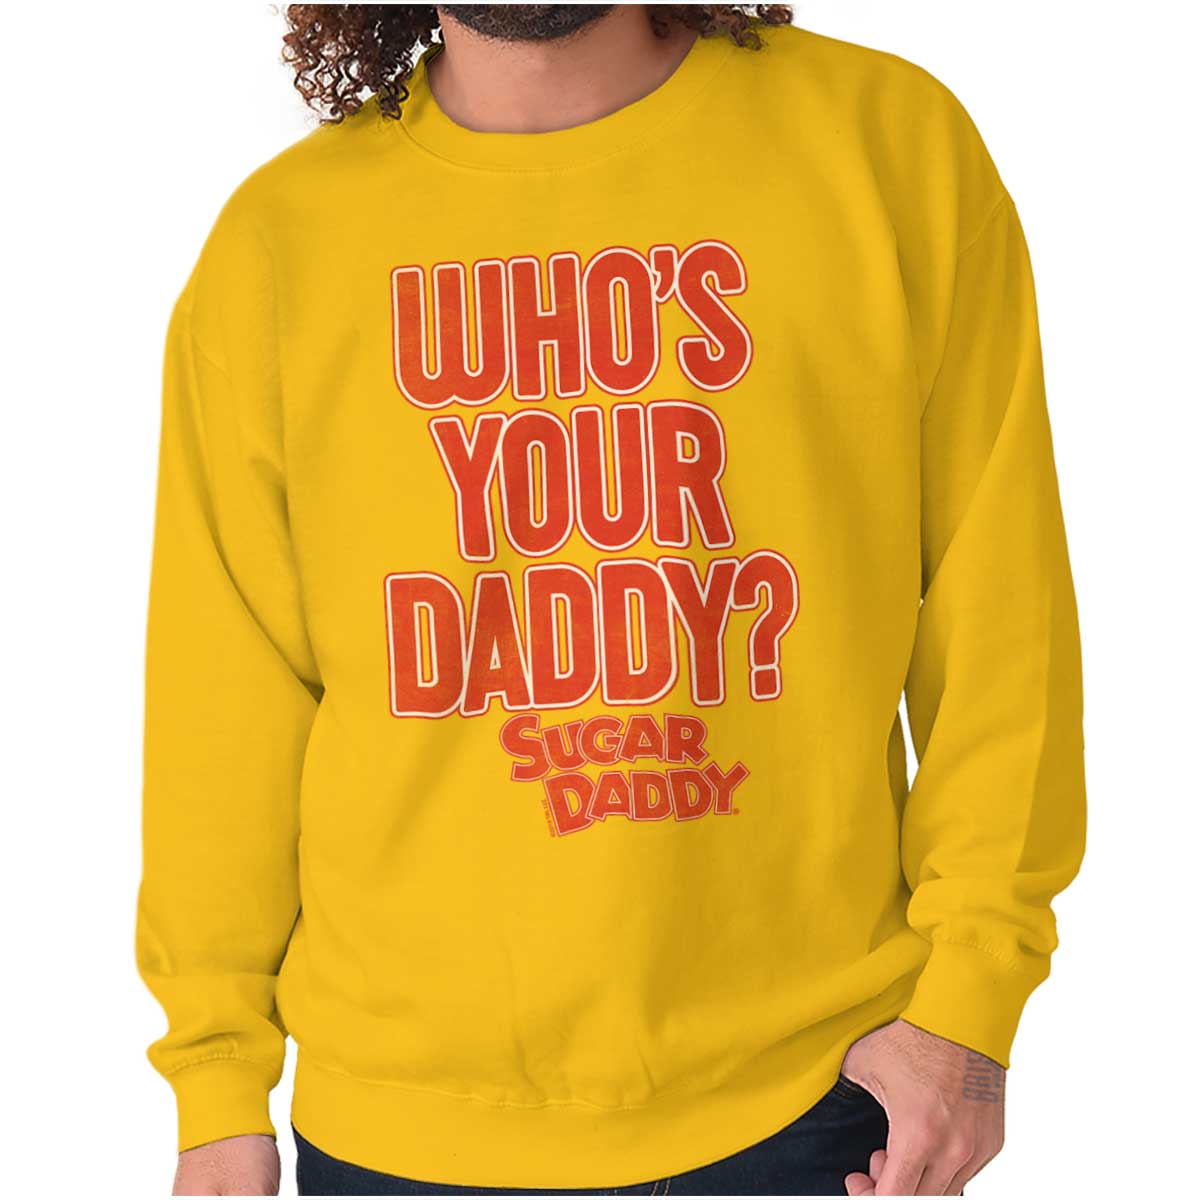 Whos Your Sugar Daddy Funny Vintage Candy Short Sleeve T Shirt Tees